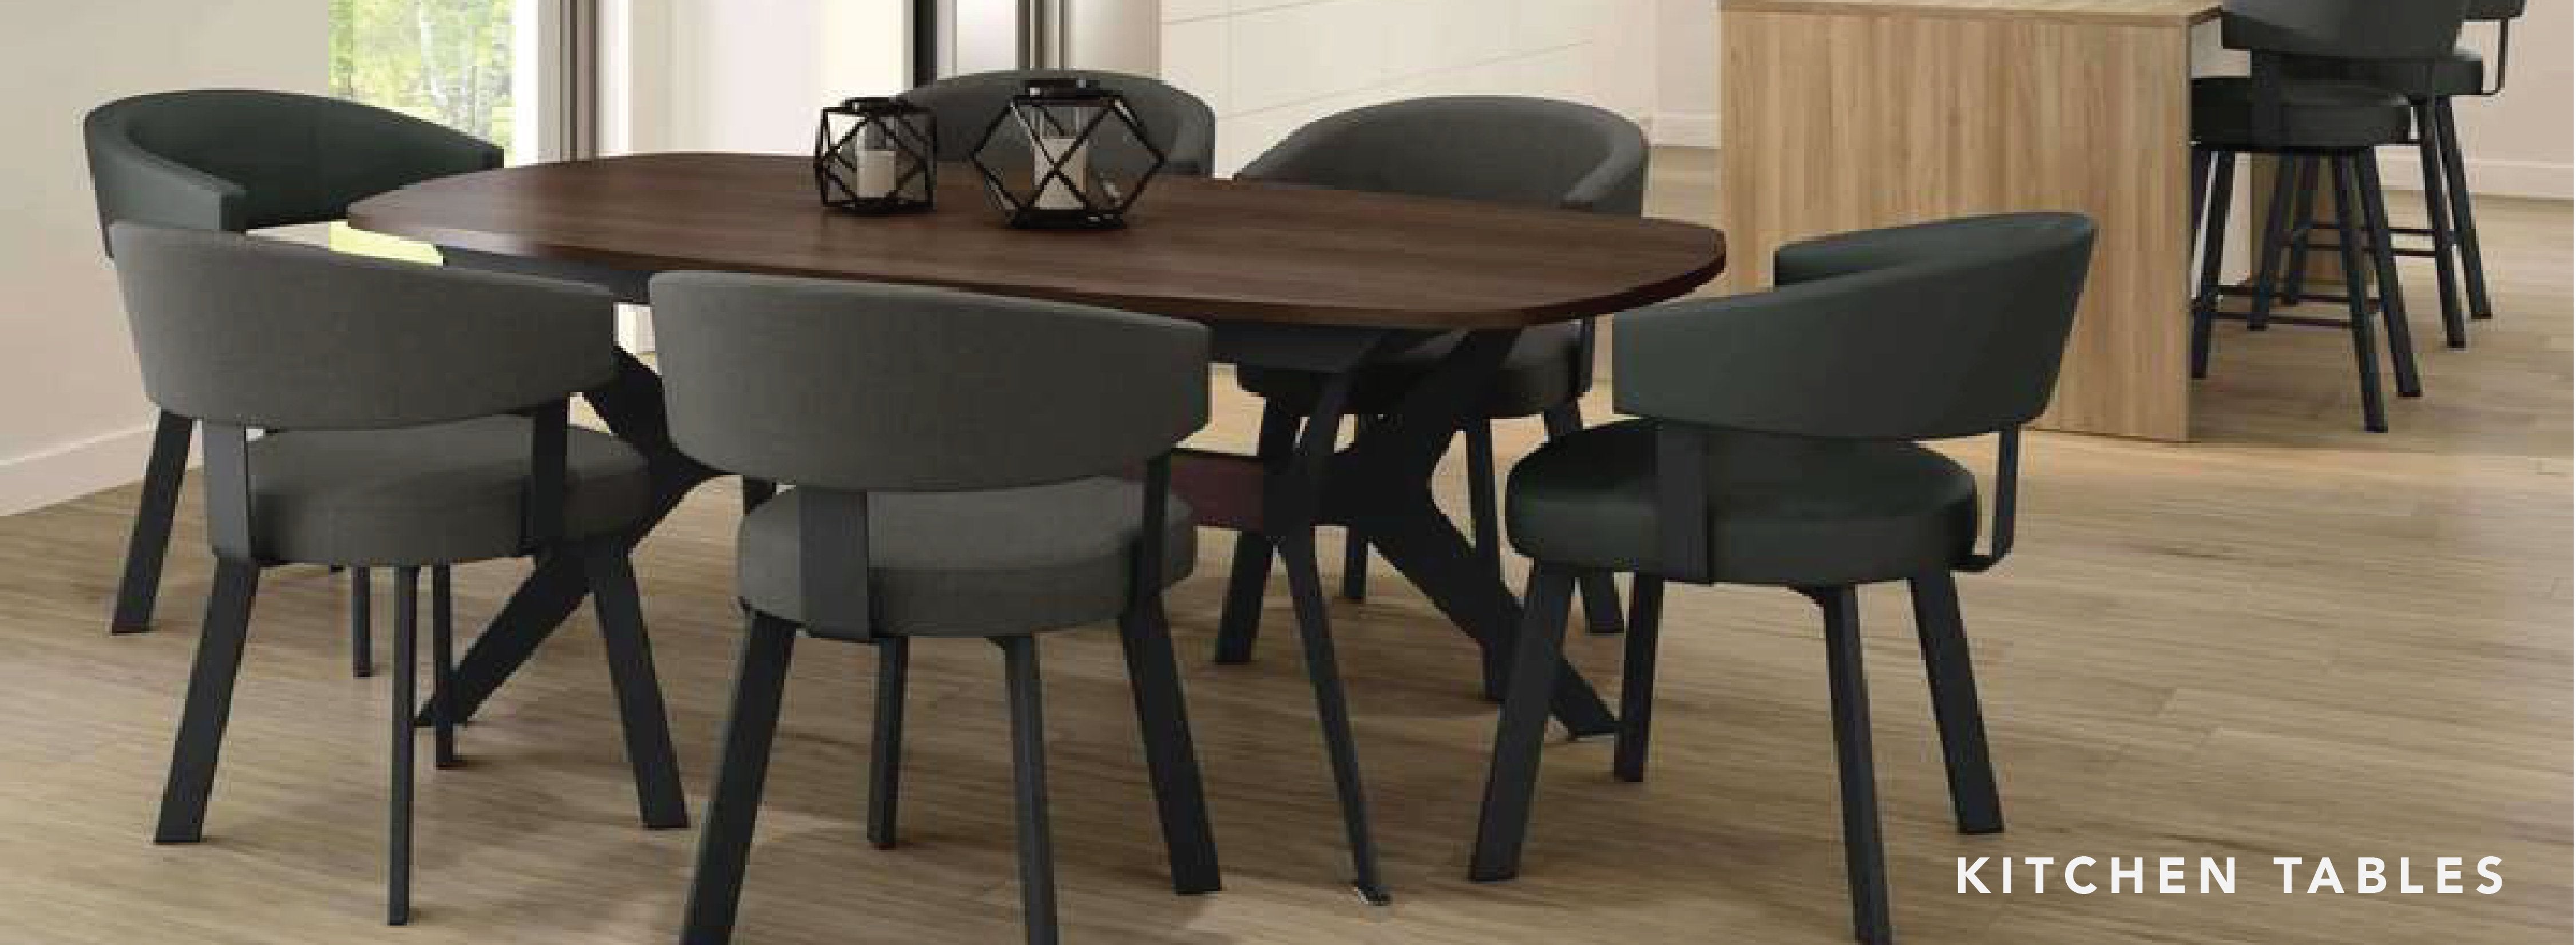 buy kitchen table canada